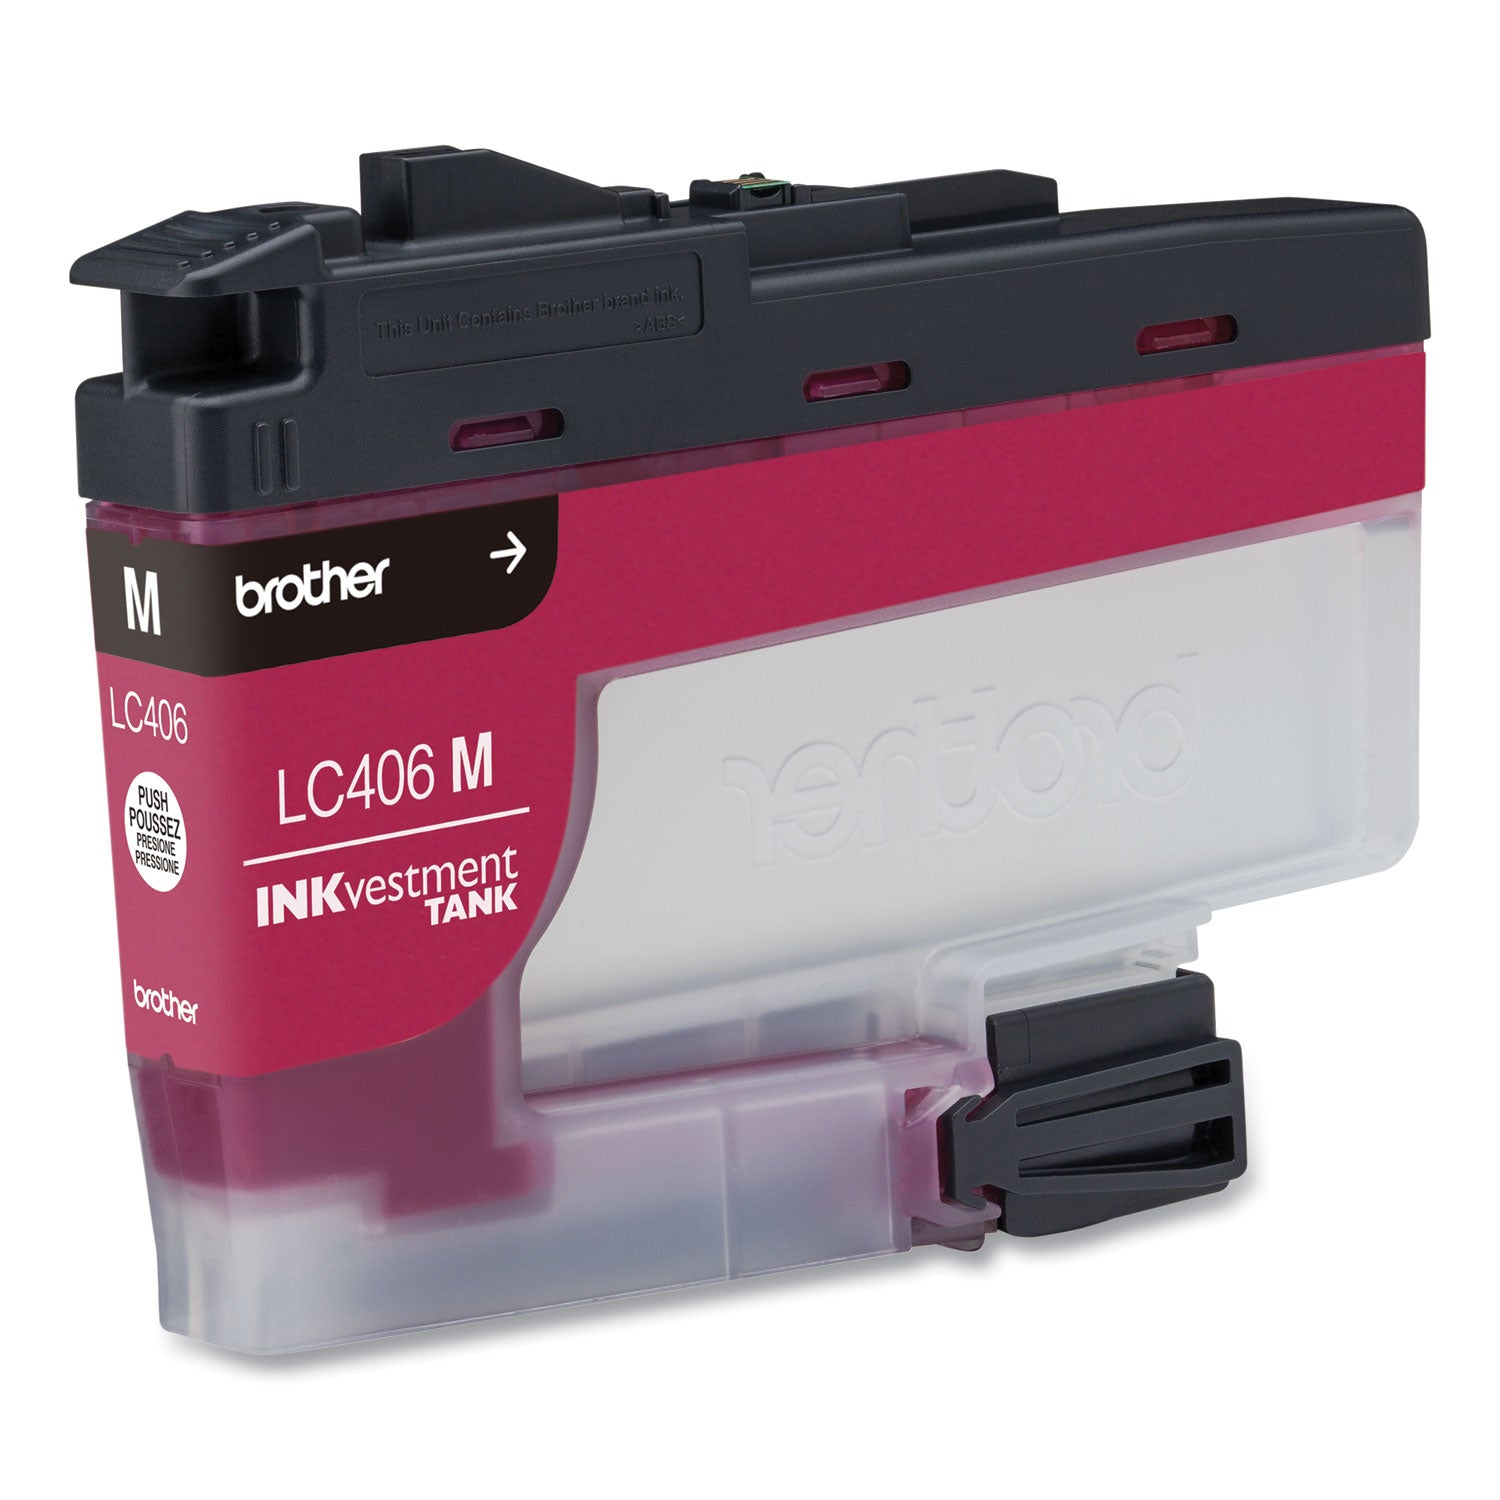 lc406ms-inkvestment-ink-1500-page-yield-magenta_brtlc406ms - 5